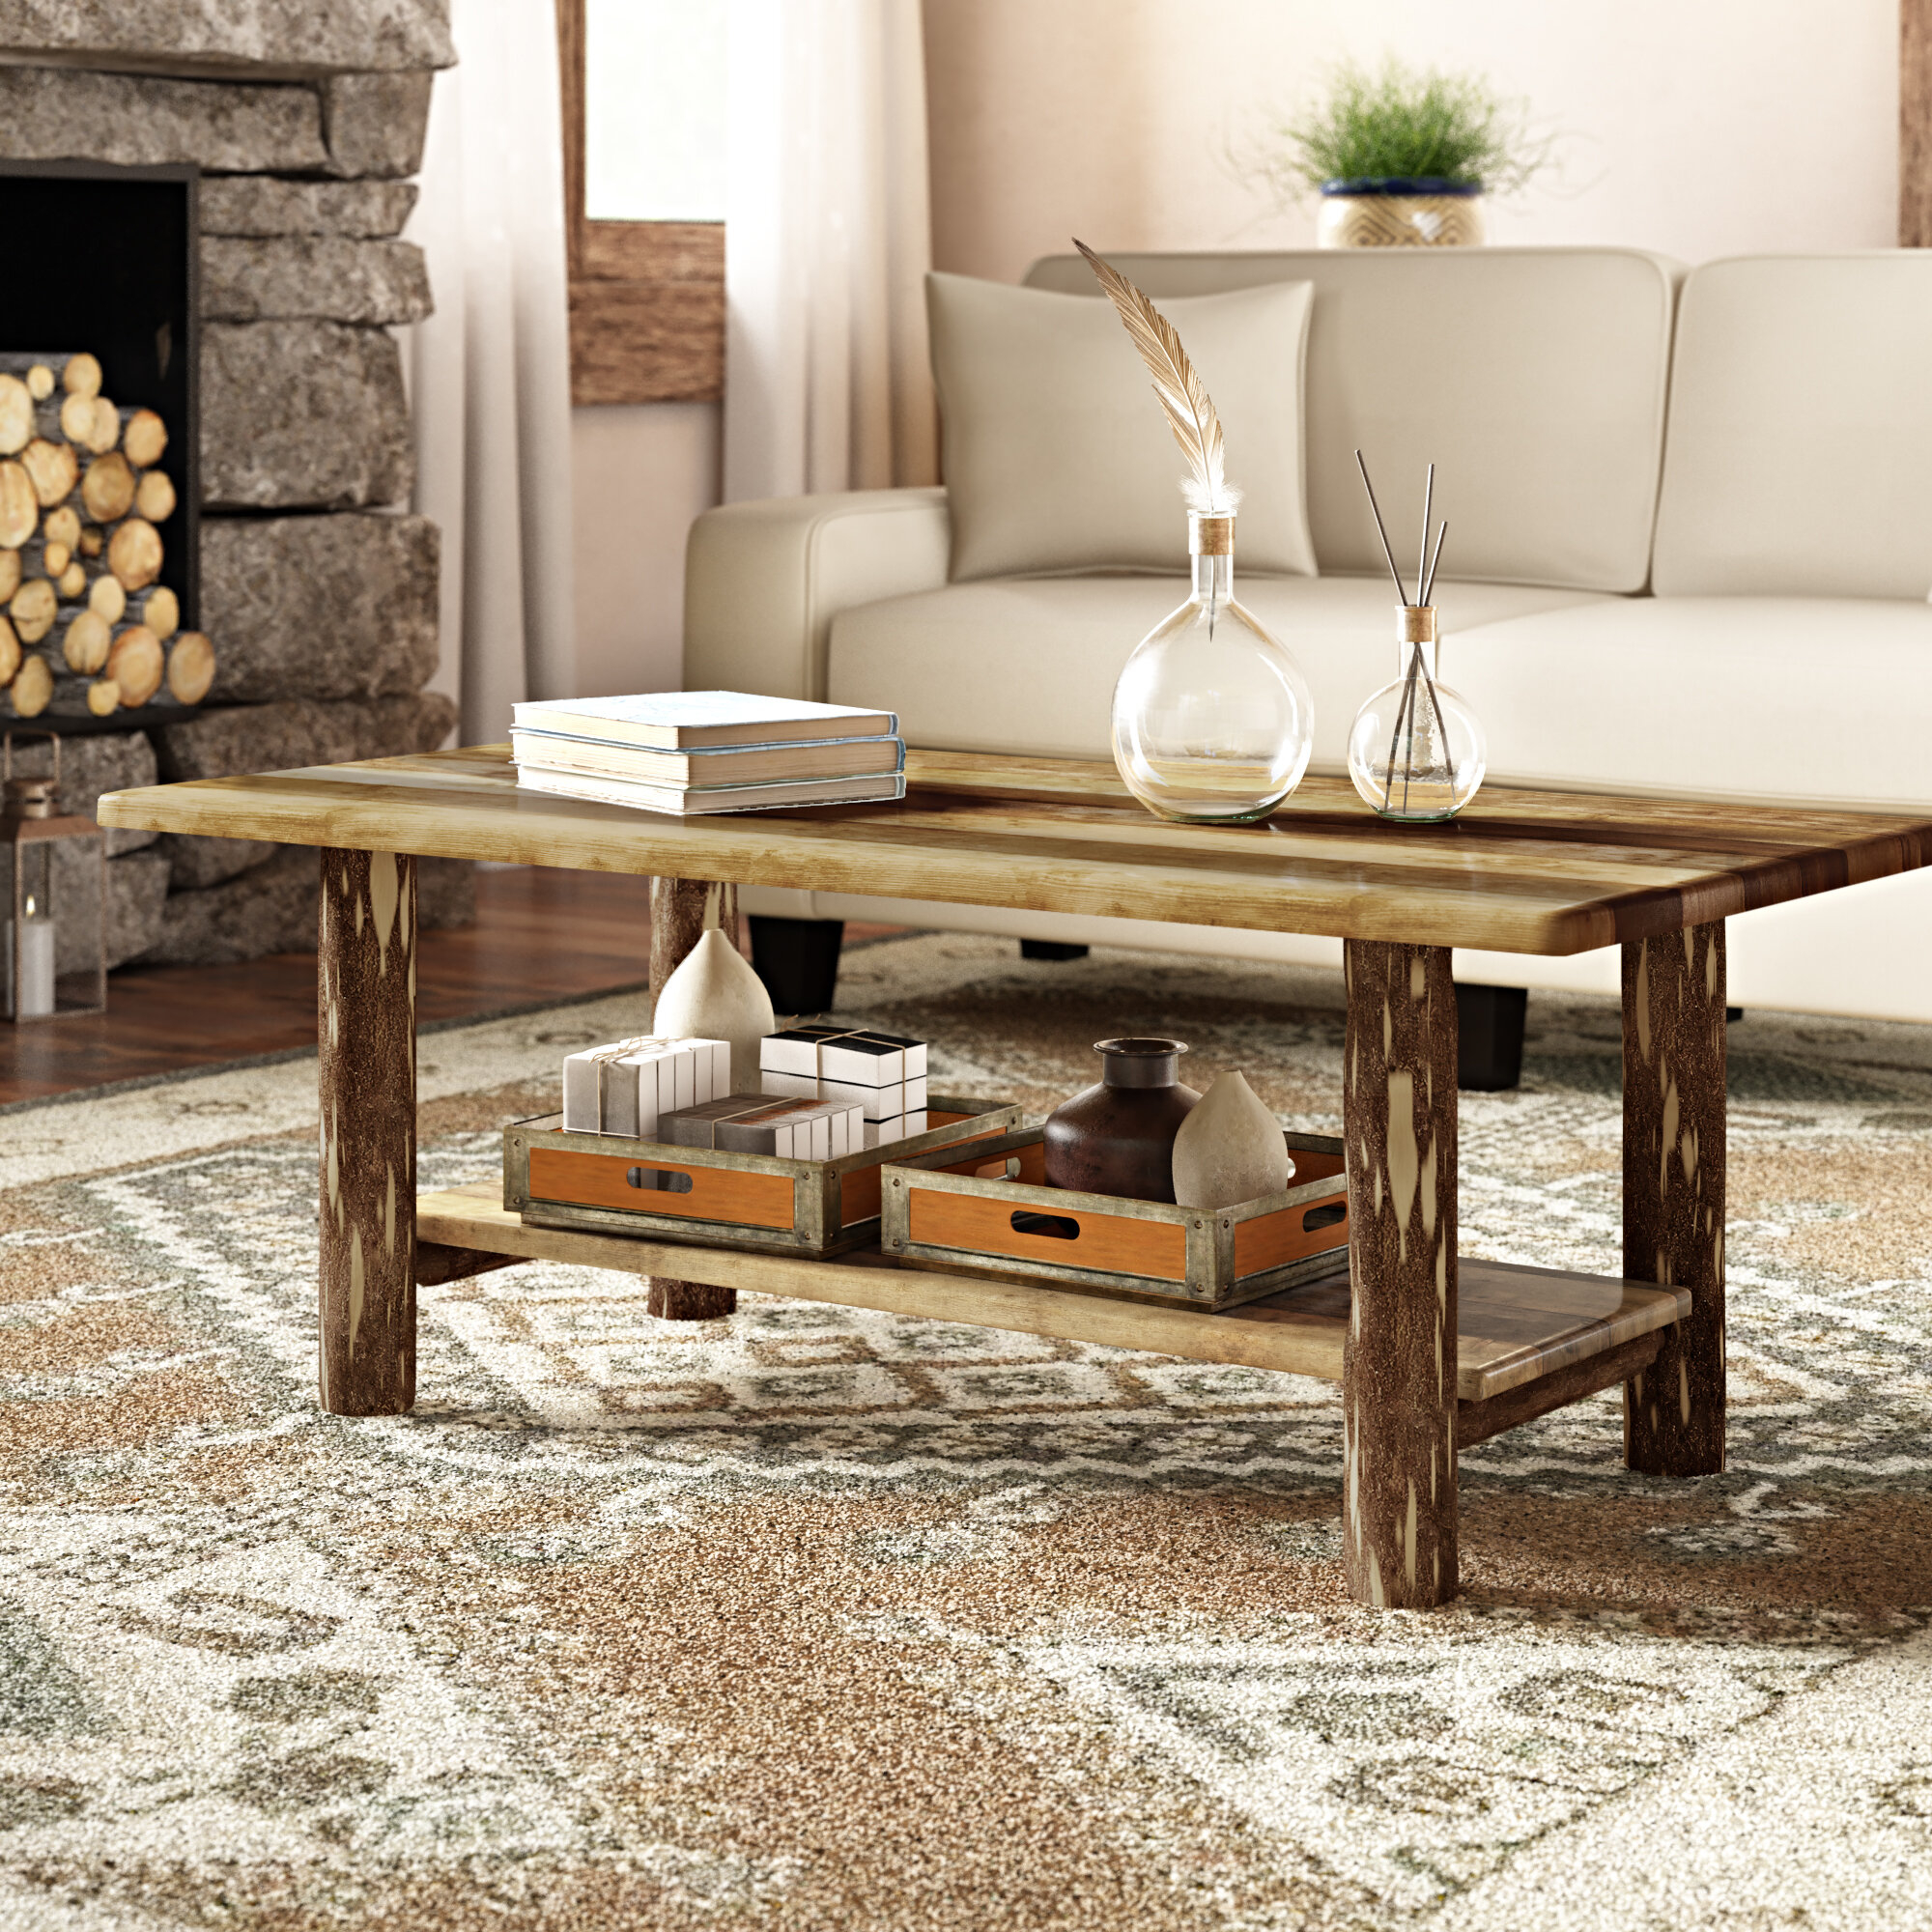 Loon Peak Tustin Unique Cabin Coffee Table Reviews Wayfair throughout proportions 2000 X 2000